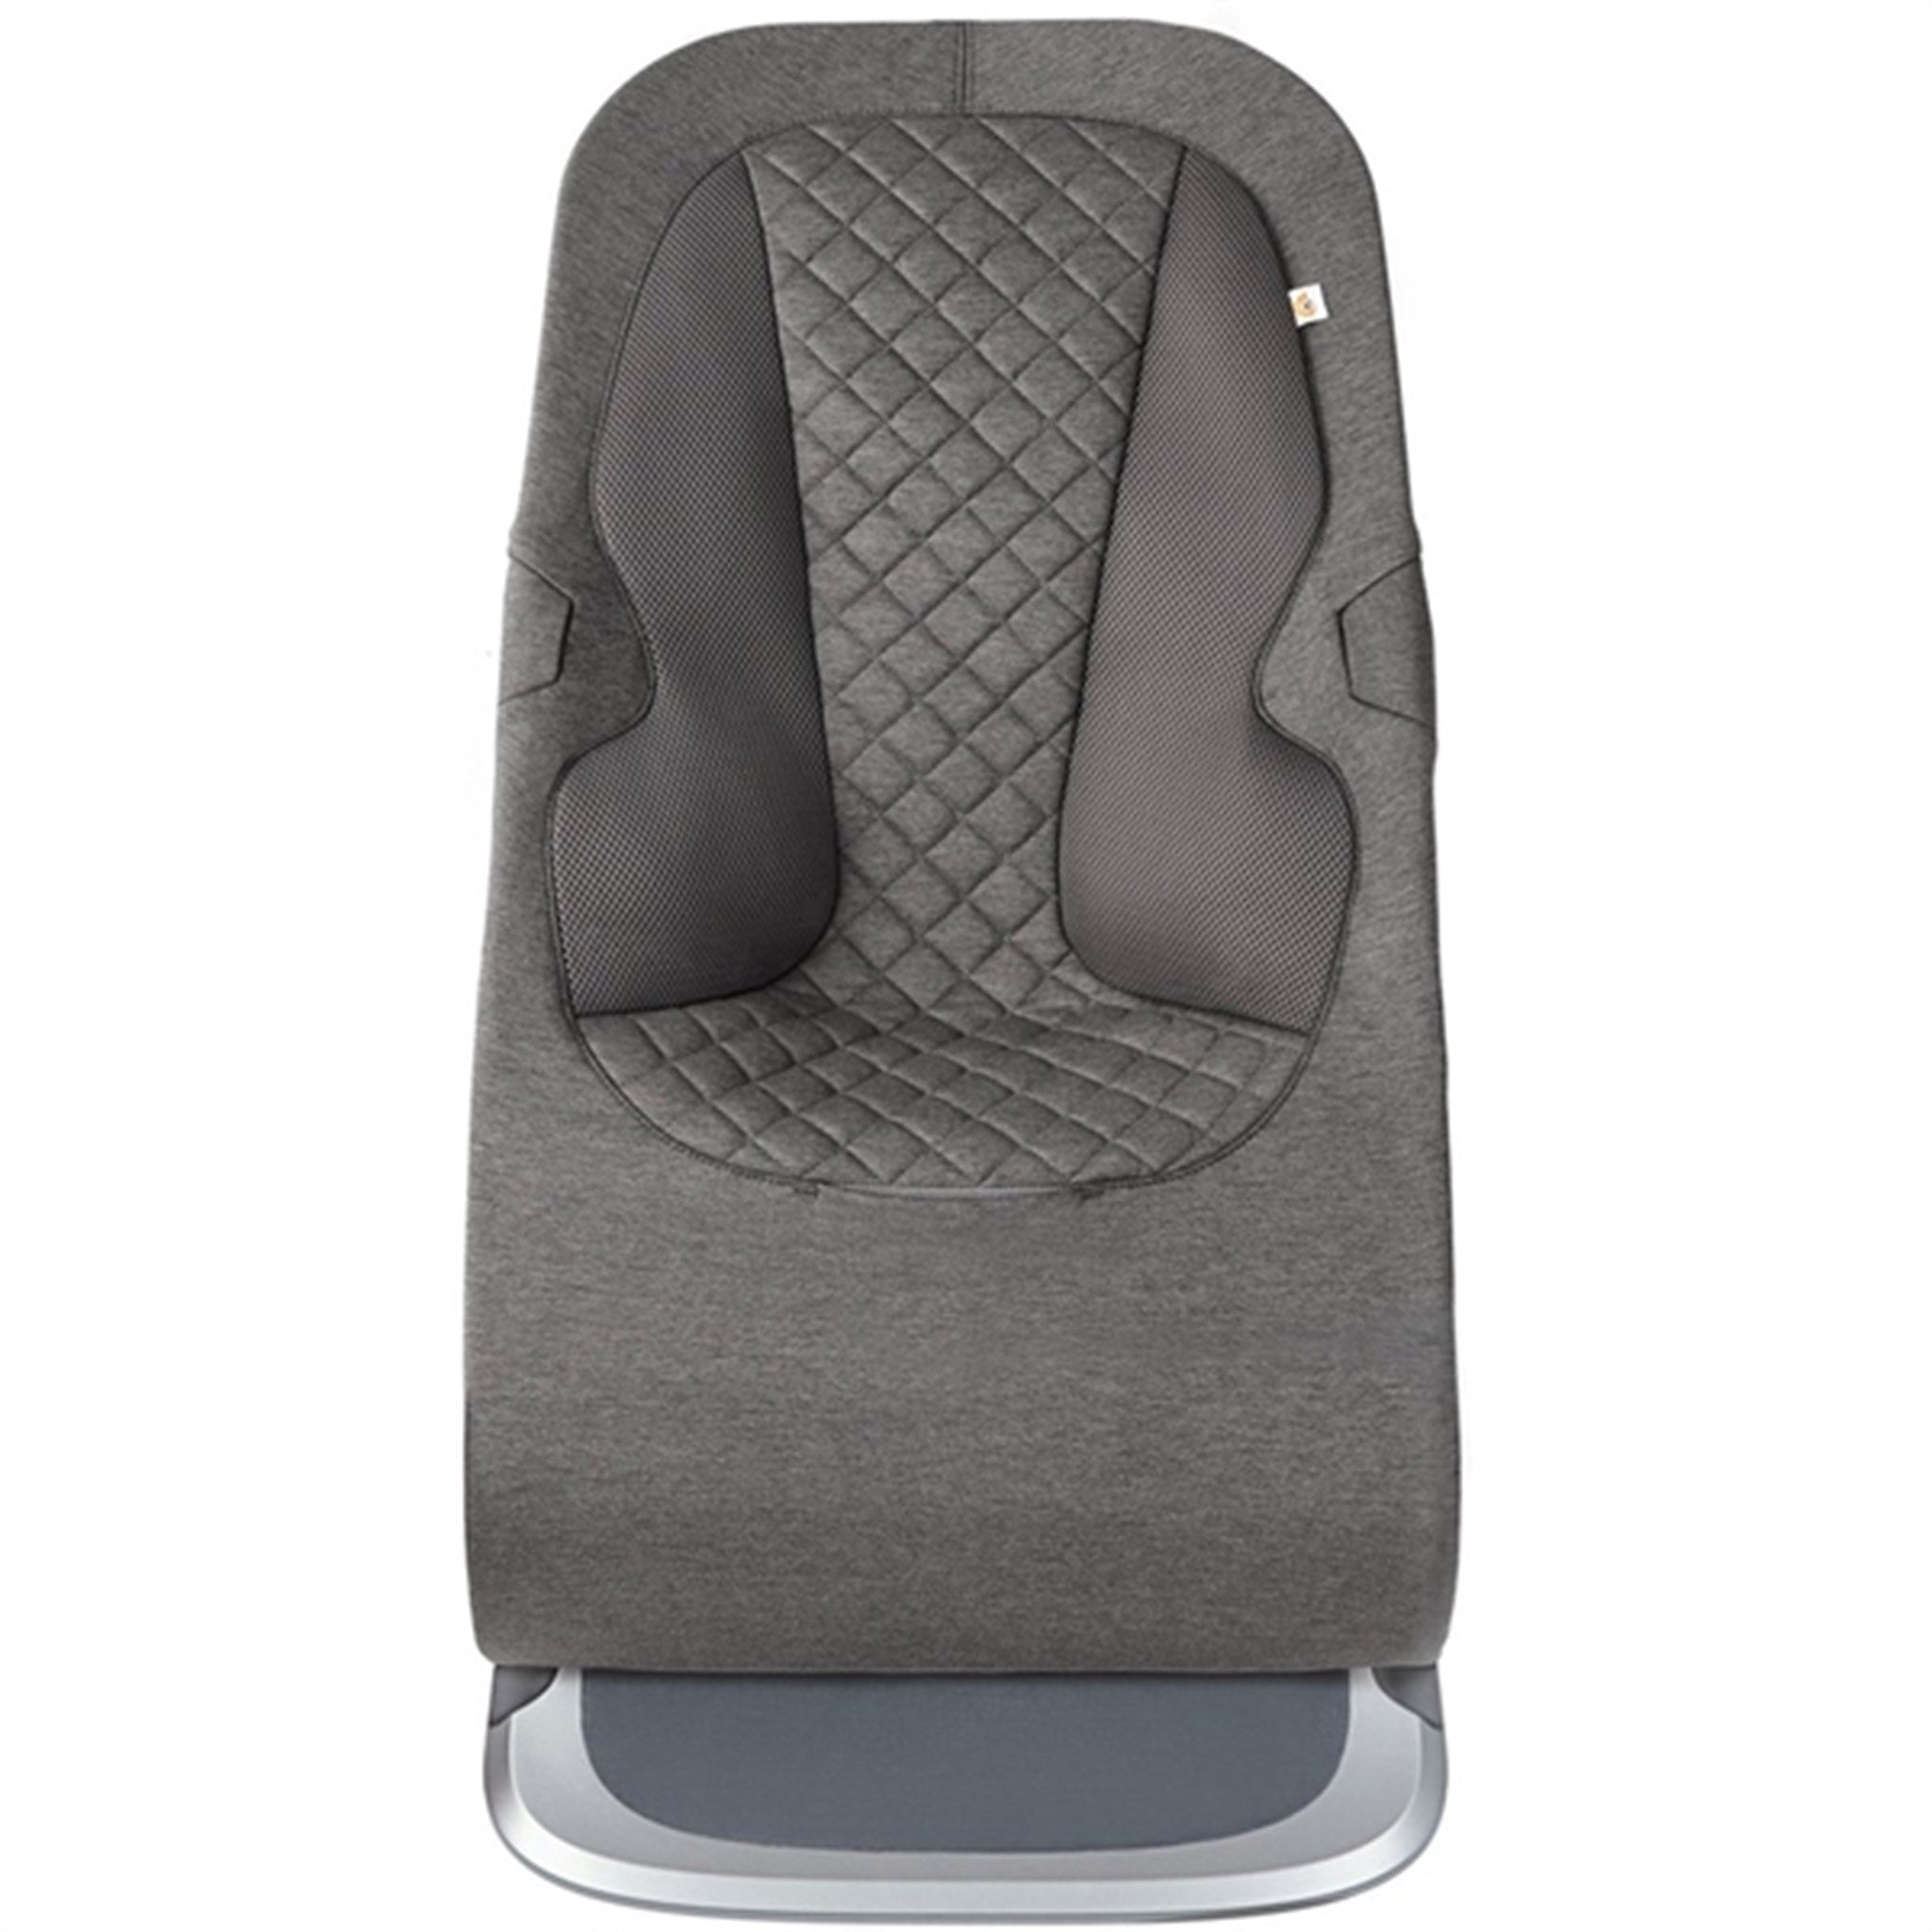 Ergobaby Evolve 3-in-1 Bouncer Charcoal Grey 6